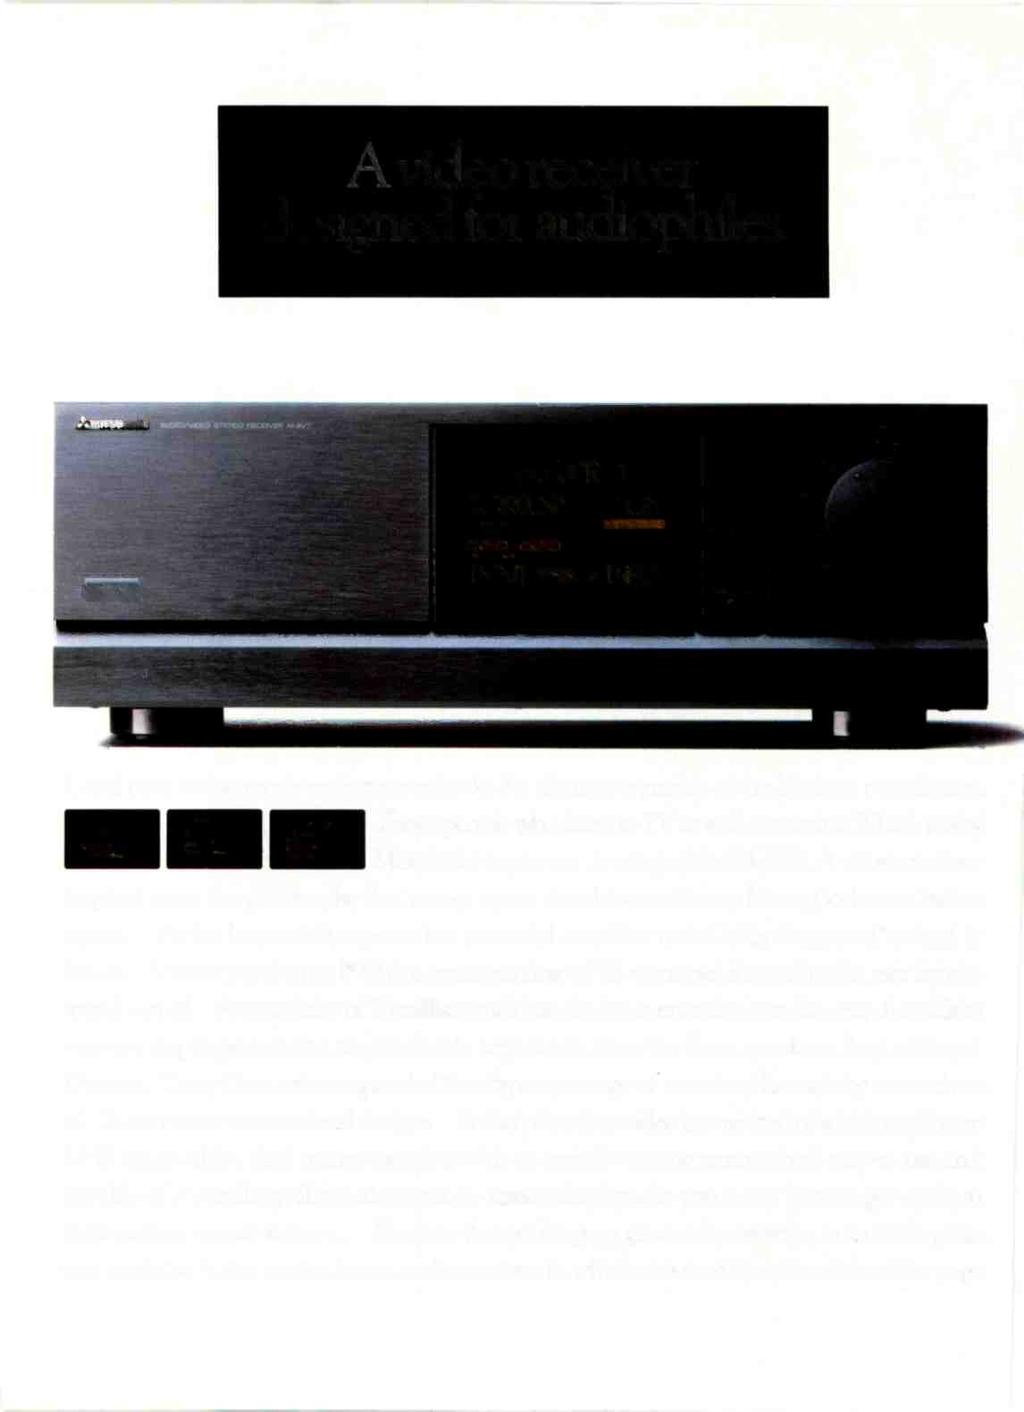 A video receiver designed for audiophiles. INPUT OCR 1 c,urround INPLIT INPUT Until now, video receivers have overlooked a distinct segment of the Nielsen population.